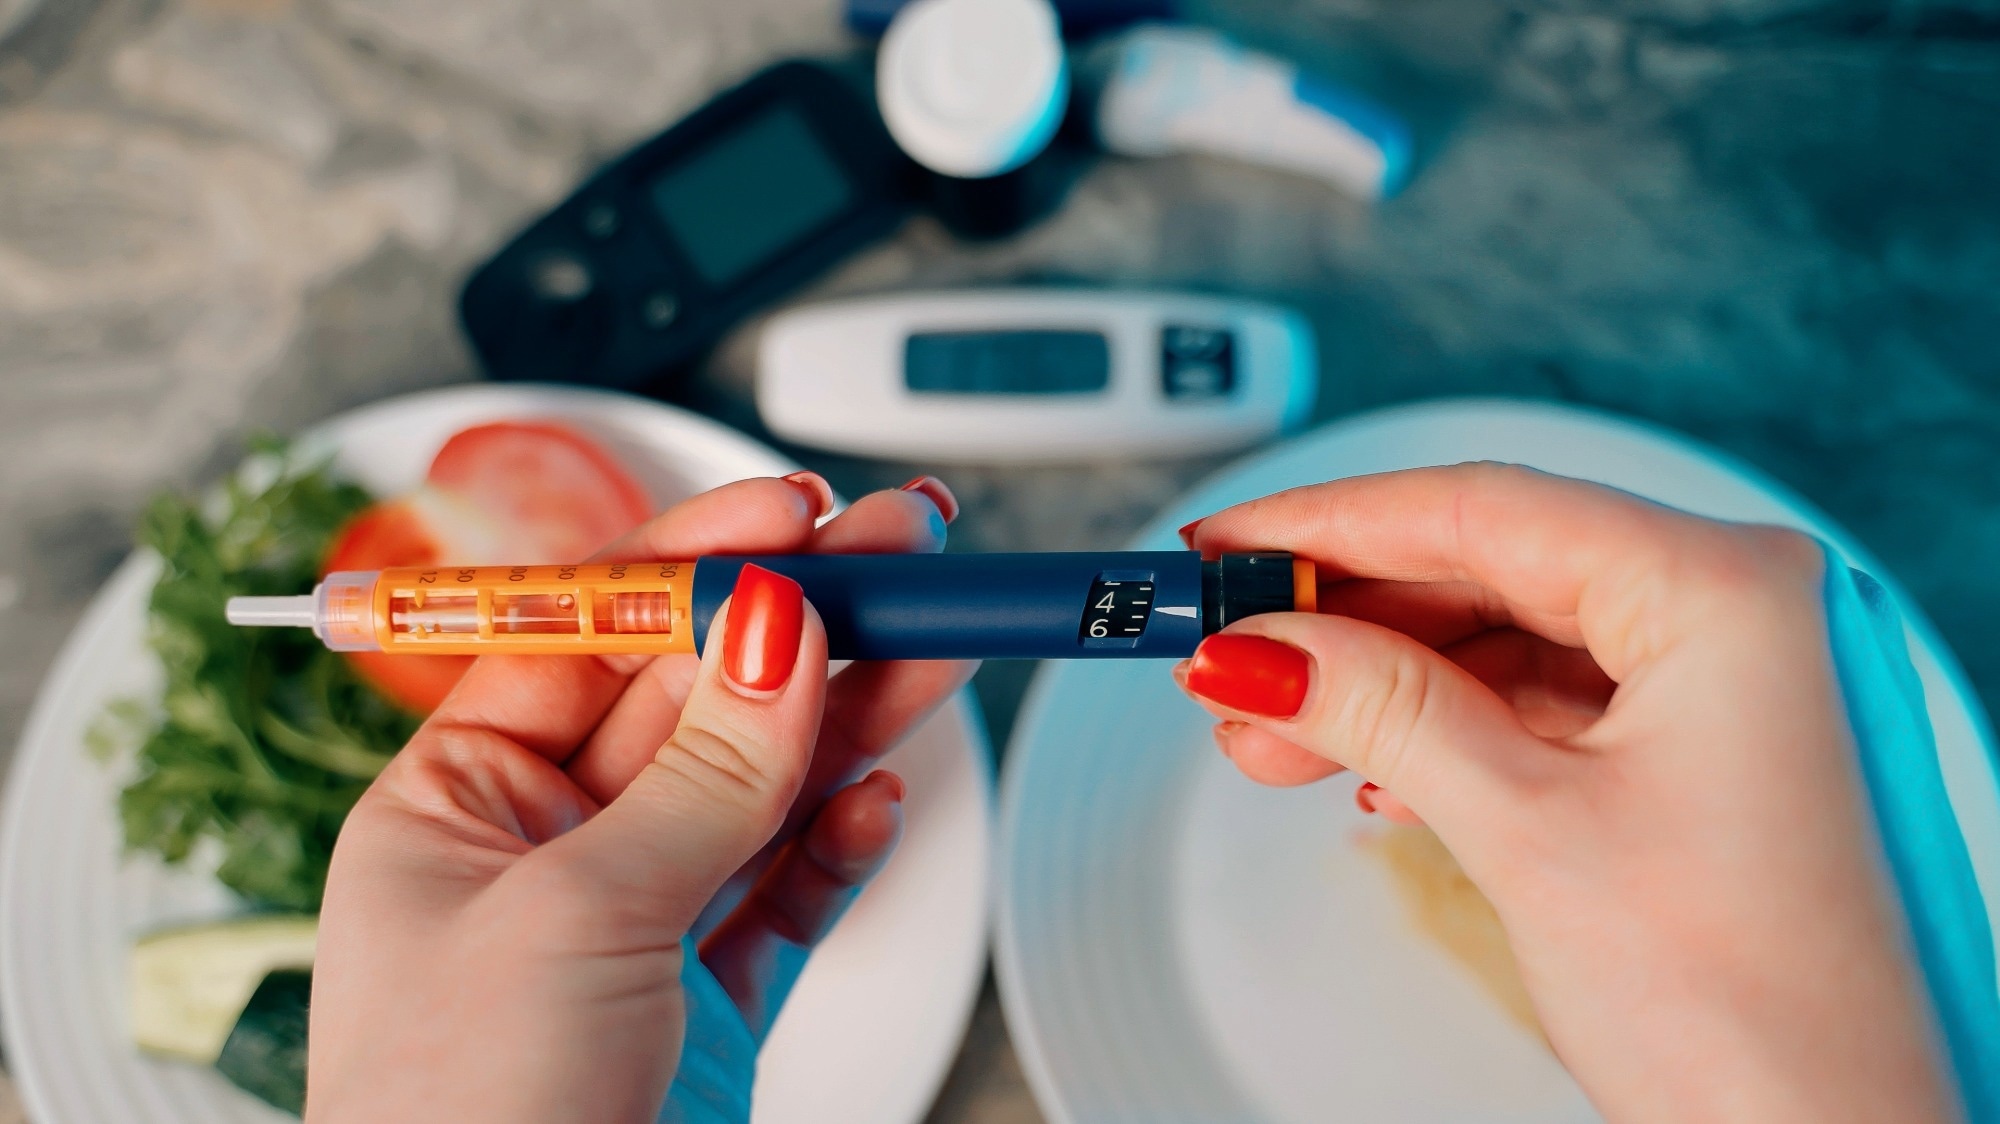 Study: Future cardiometabolic implications of insulin hypersecretion in response to oral glucose: a prospective cohort study. Image Credit: VSh PRODUCTION / Shutterstock